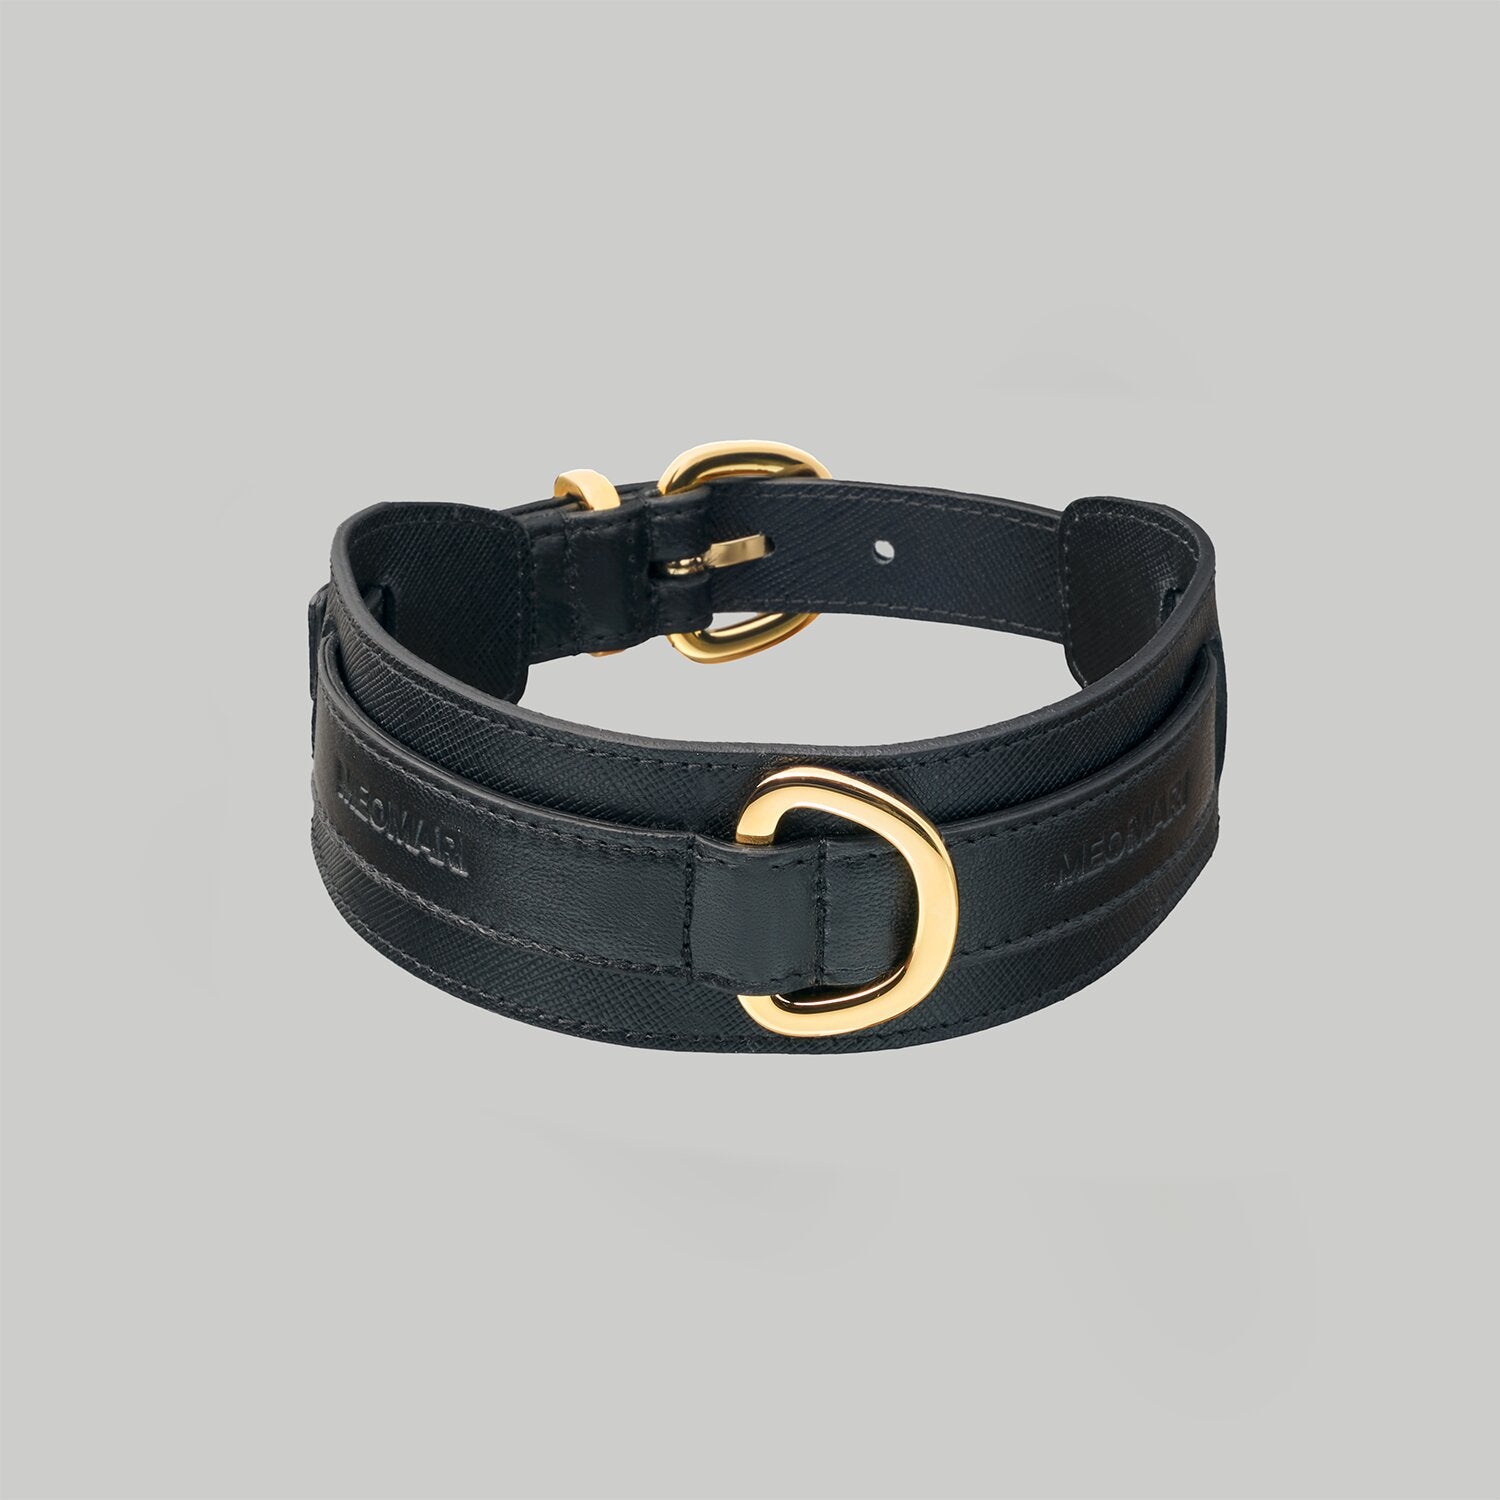 Luxury Dog collar in black Saffiano leather with Gold